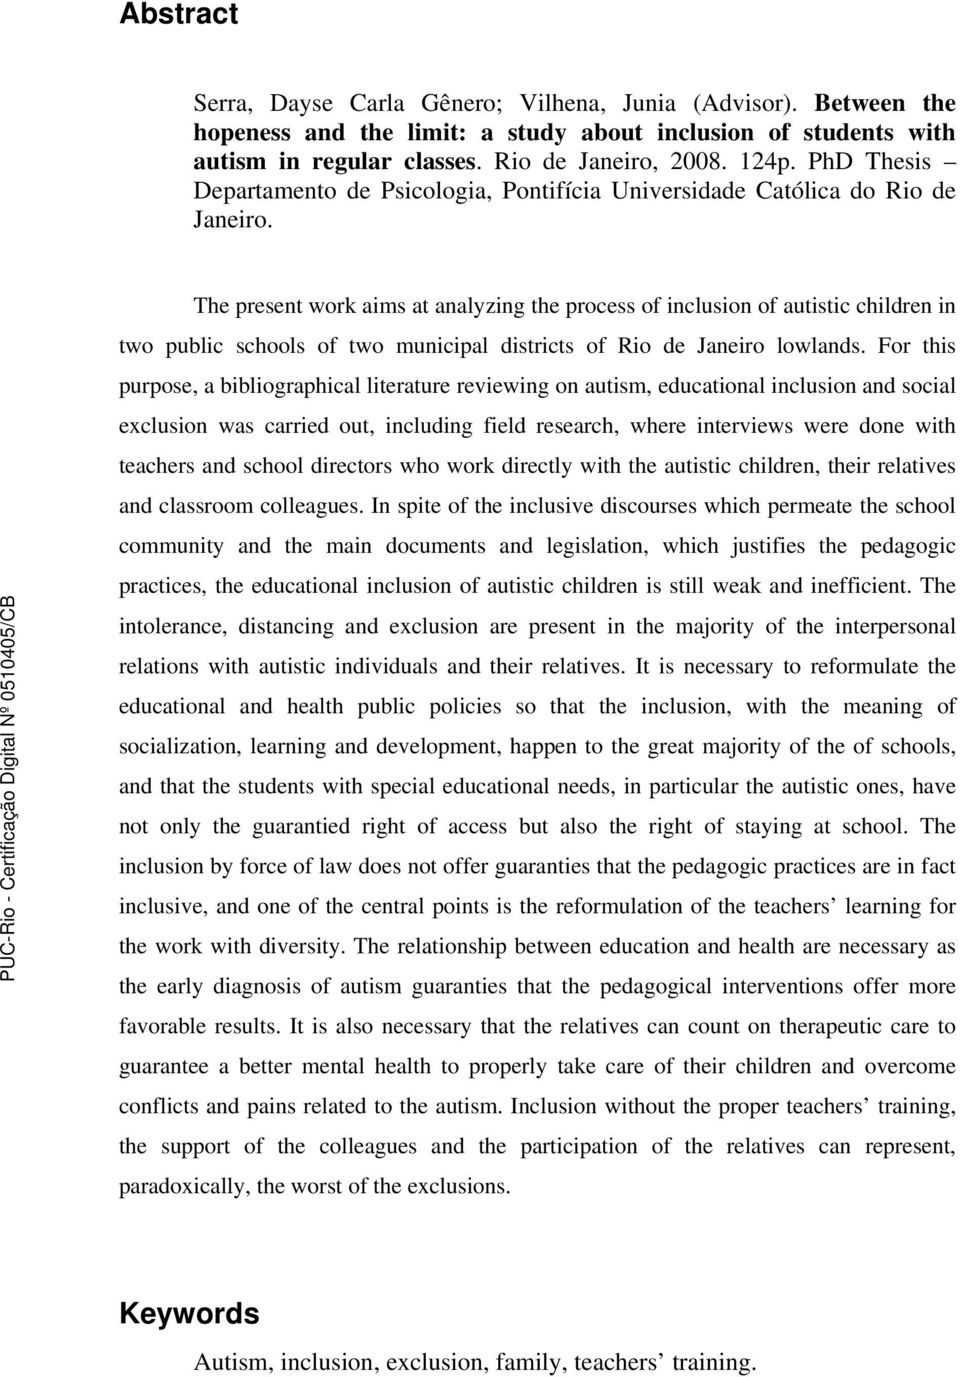 The present work aims at analyzing the process of inclusion of autistic children in two public schools of two municipal districts of Rio de Janeiro lowlands.